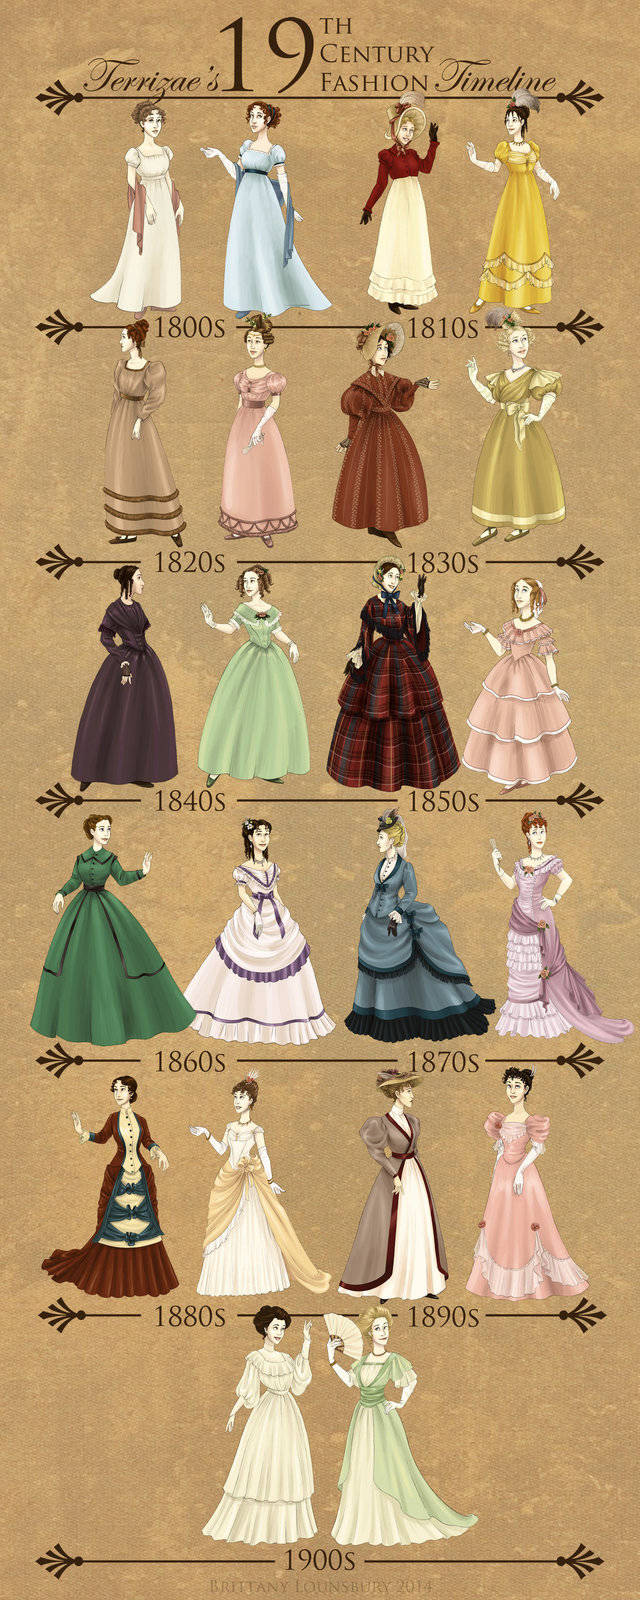 https://image.sistacafe.com/images/uploads/content_image/image/35364/1441953556-19th_century_fashion_timeline_by_terrizae-d7nel9y.jpg